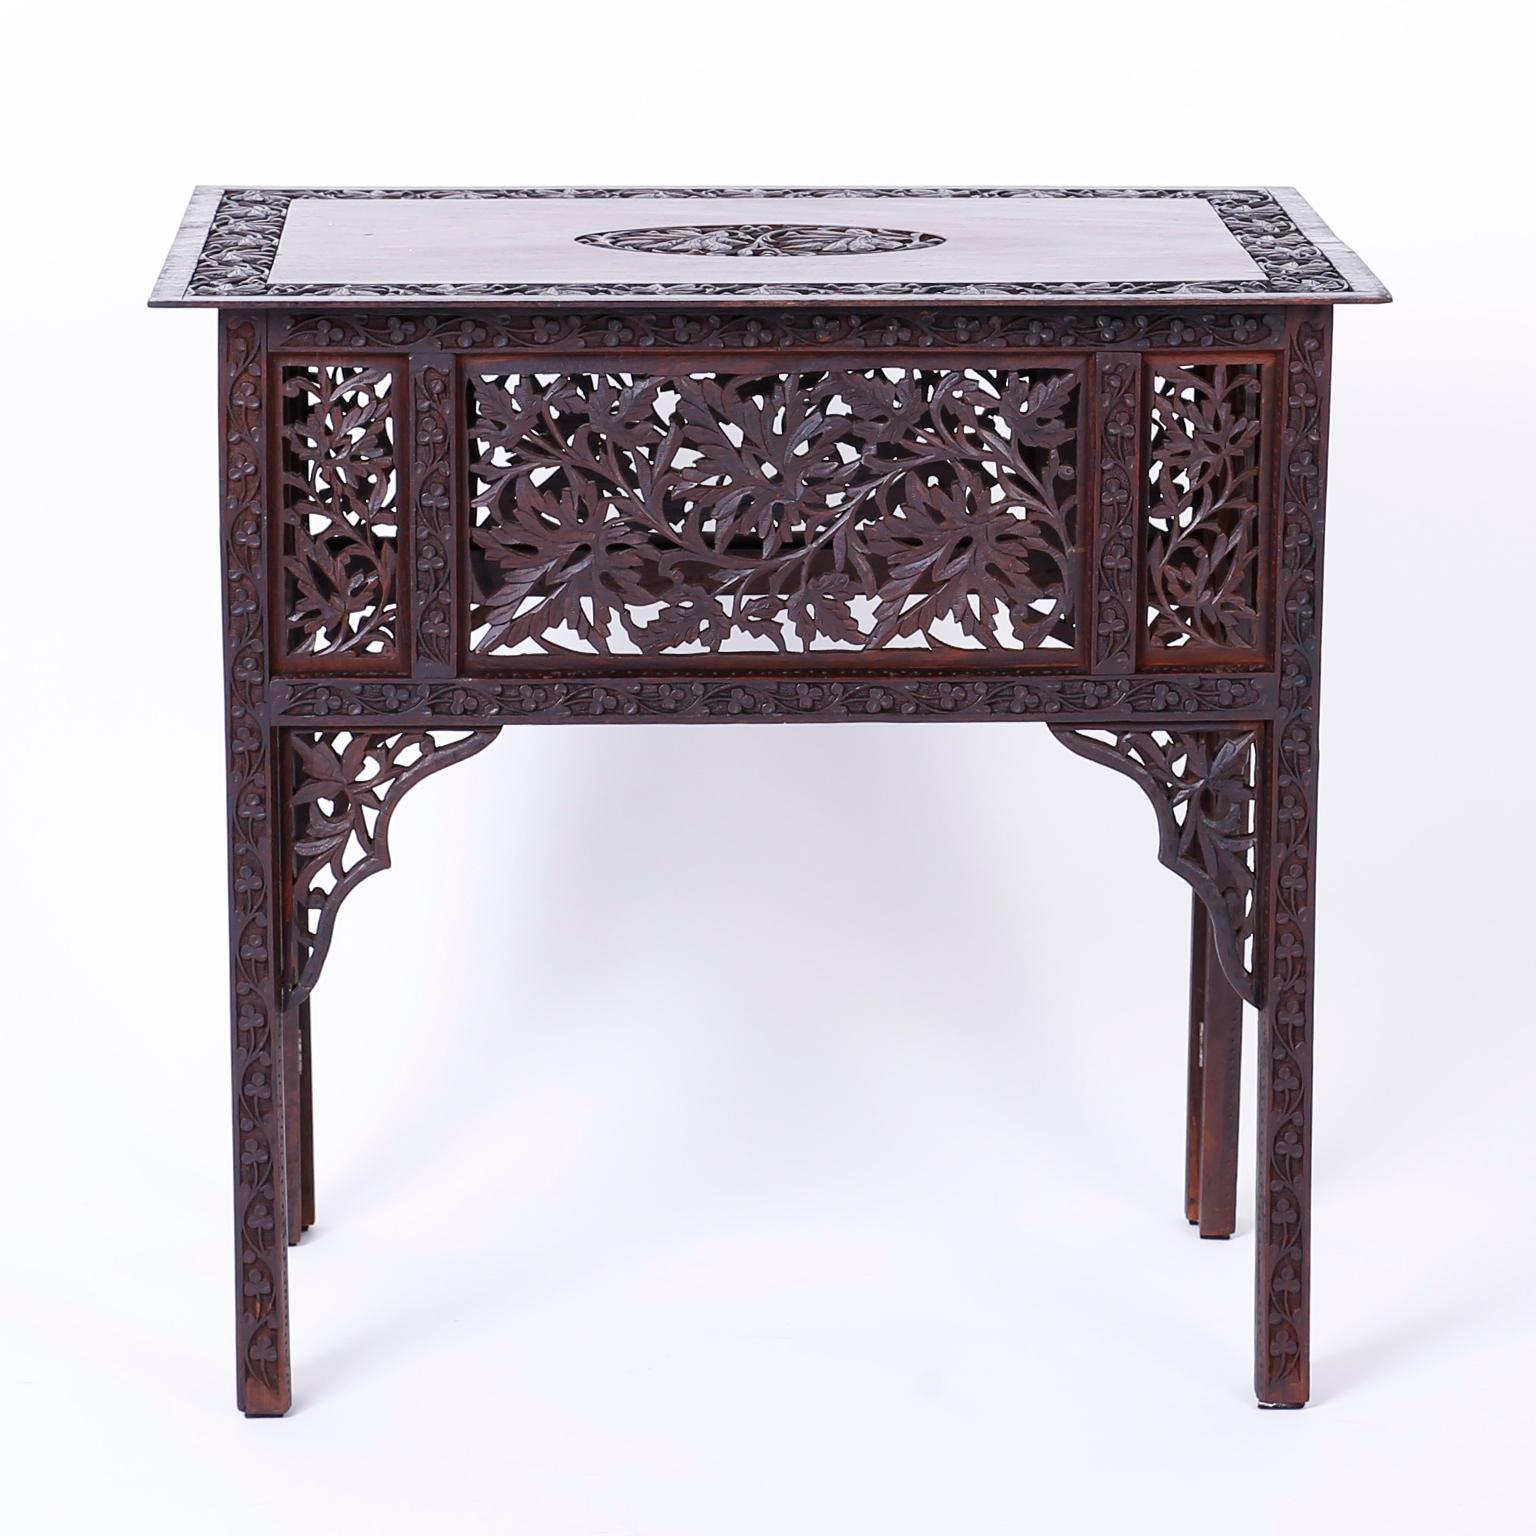 Stand out antique Anglo-Indian Bombay black wood side table or occasional table with expertly carved leaf designs on a center medallion, frame, sides, and bracket supports.
 